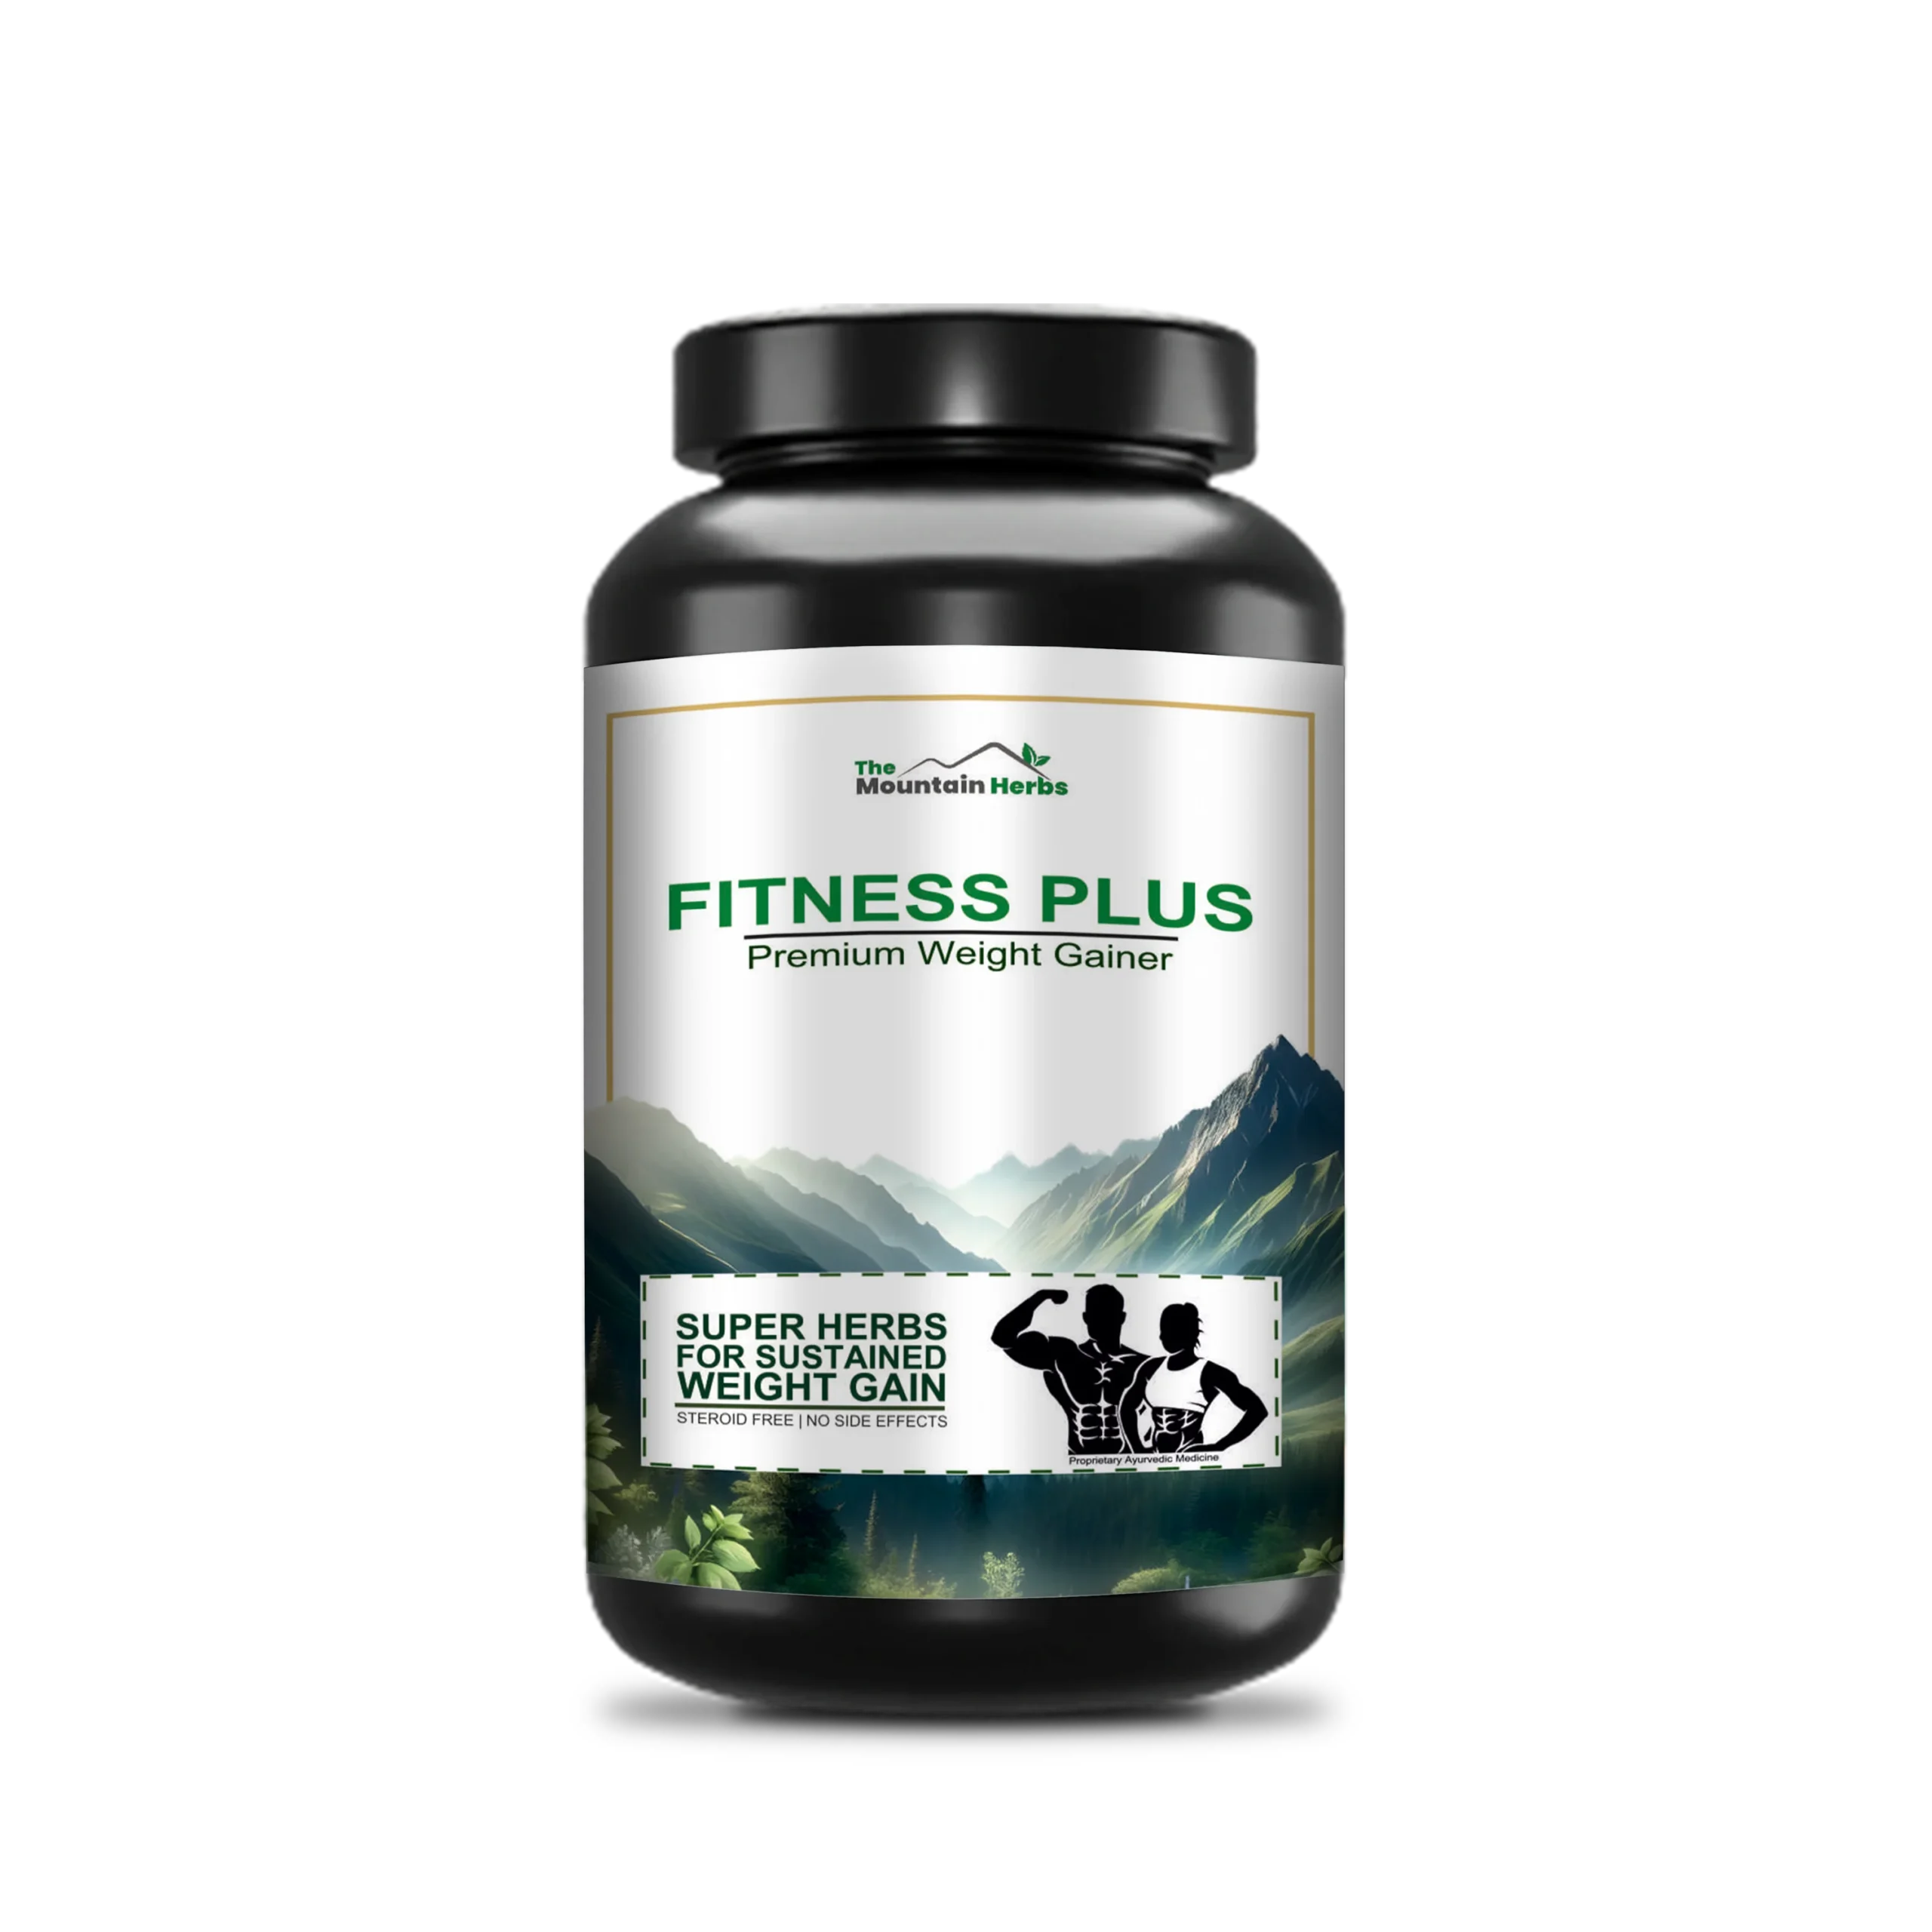 Fitness Plus Premium Weight Gainer 13 - The Mountain Herbs